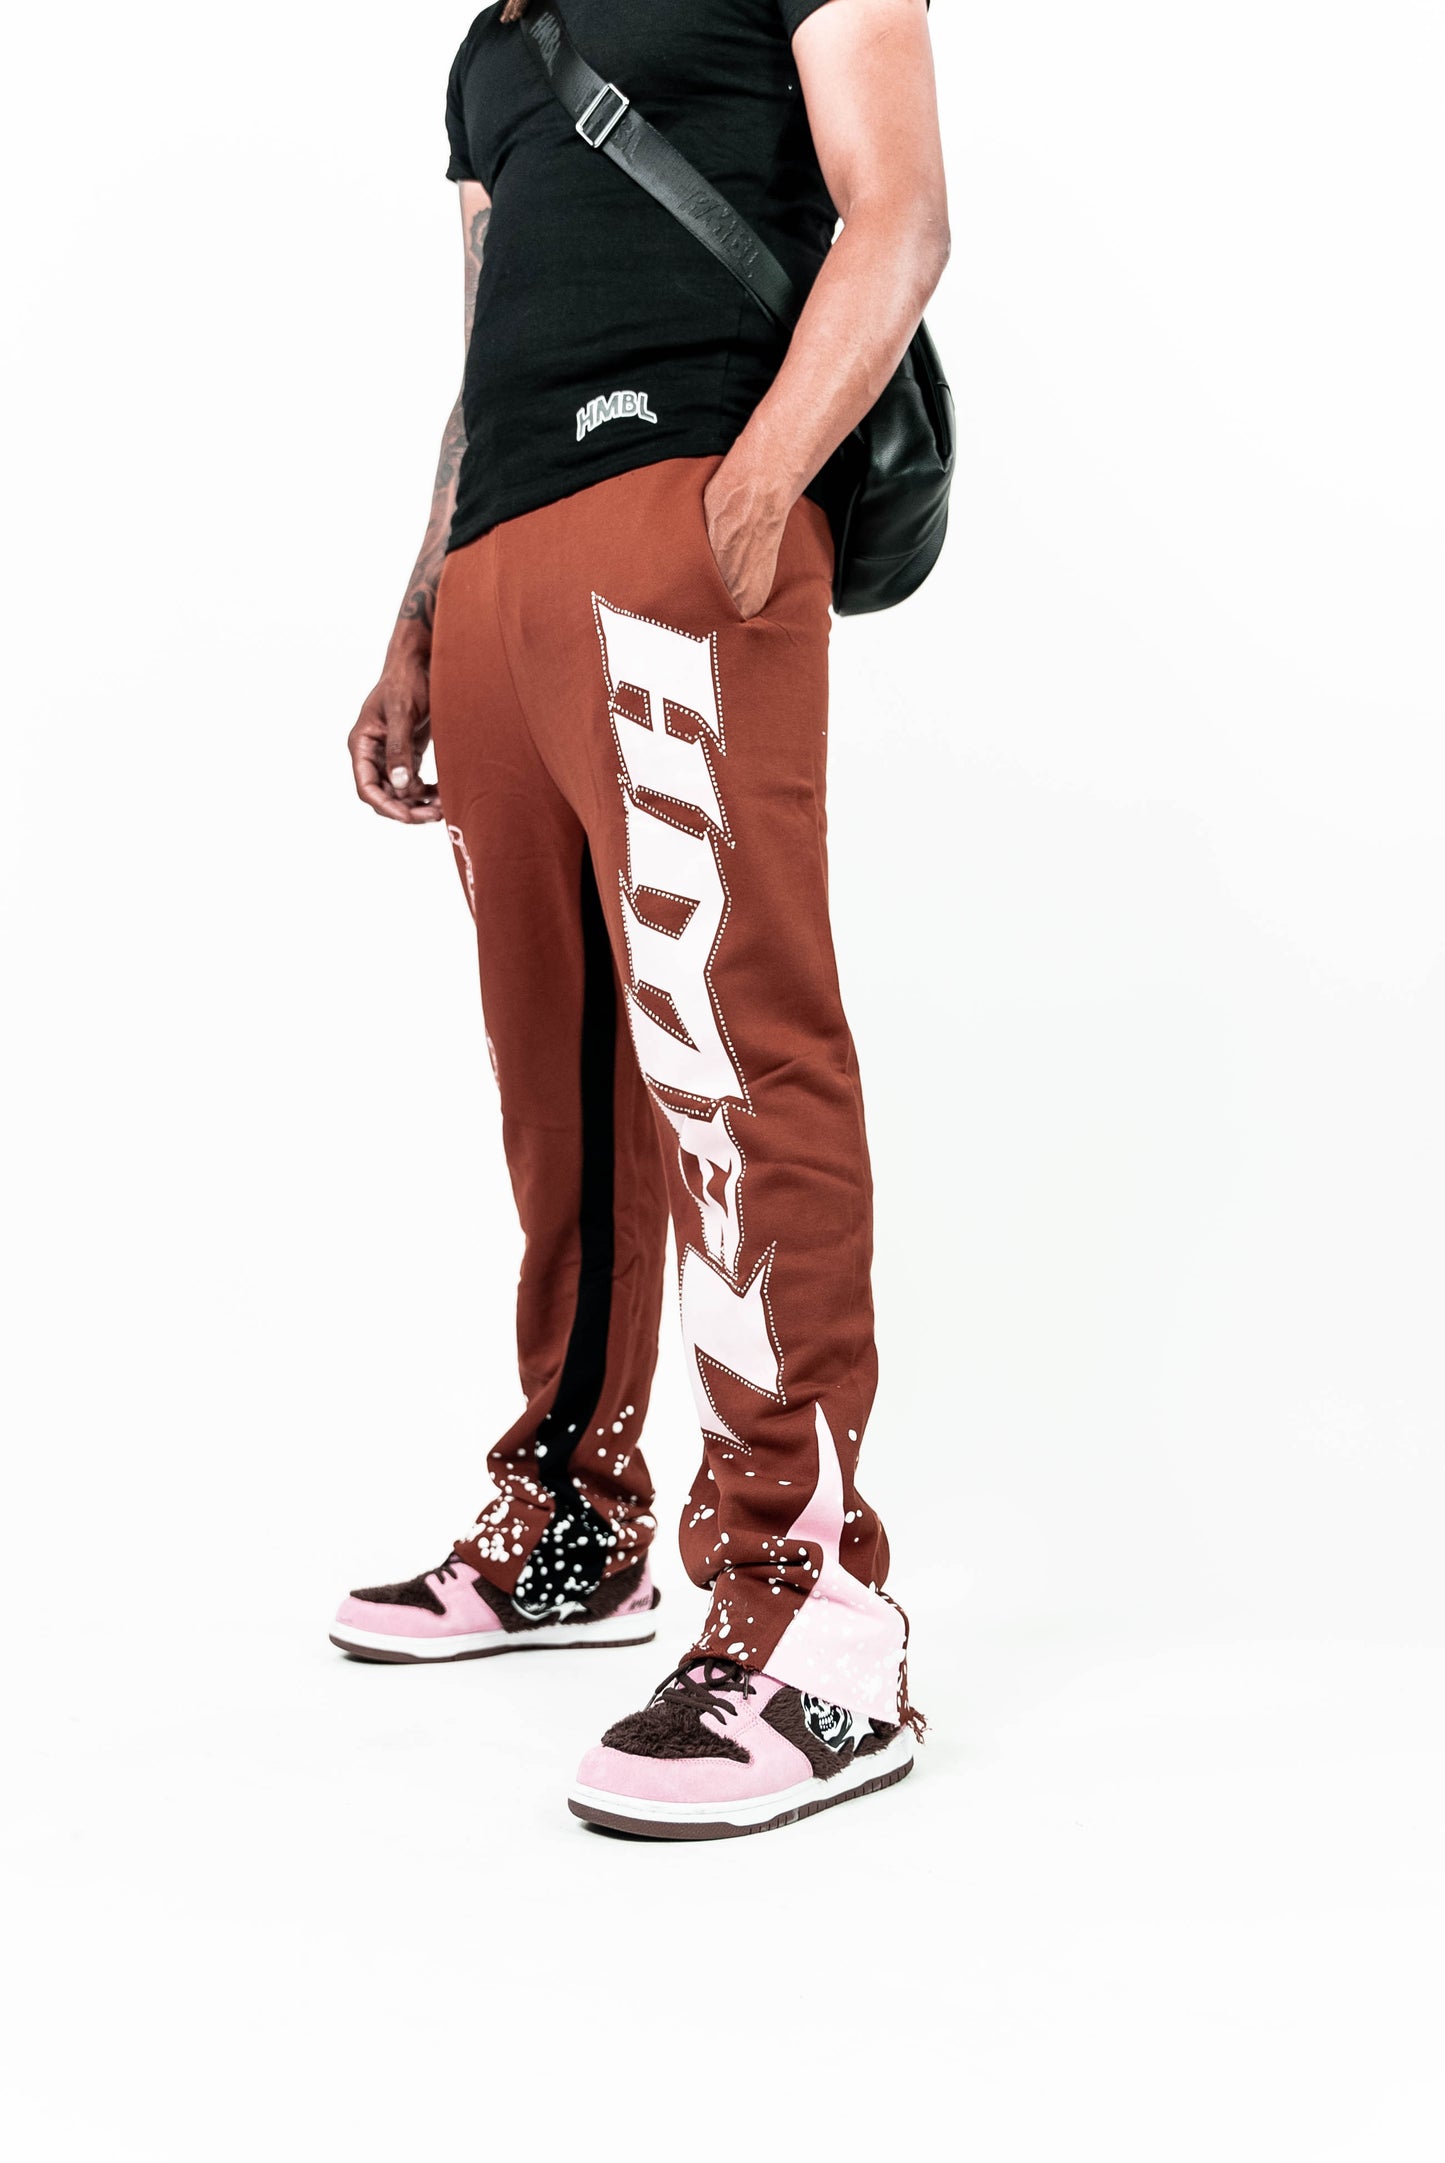 Brown mocha painted stacked pants